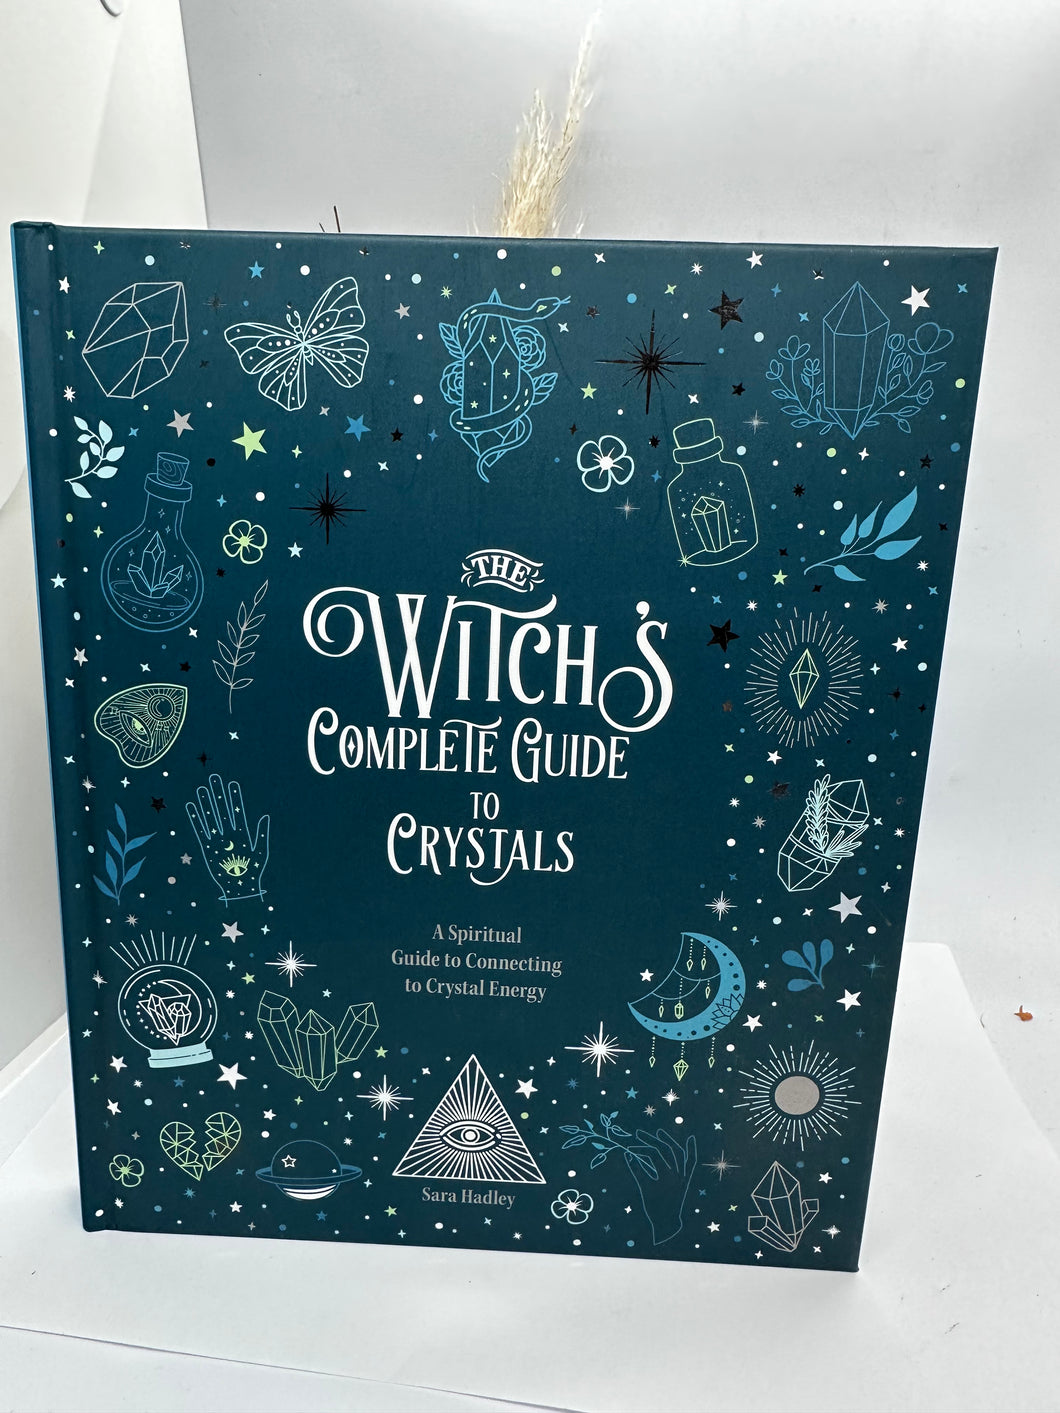 The Witches Complete Guide to Crystals